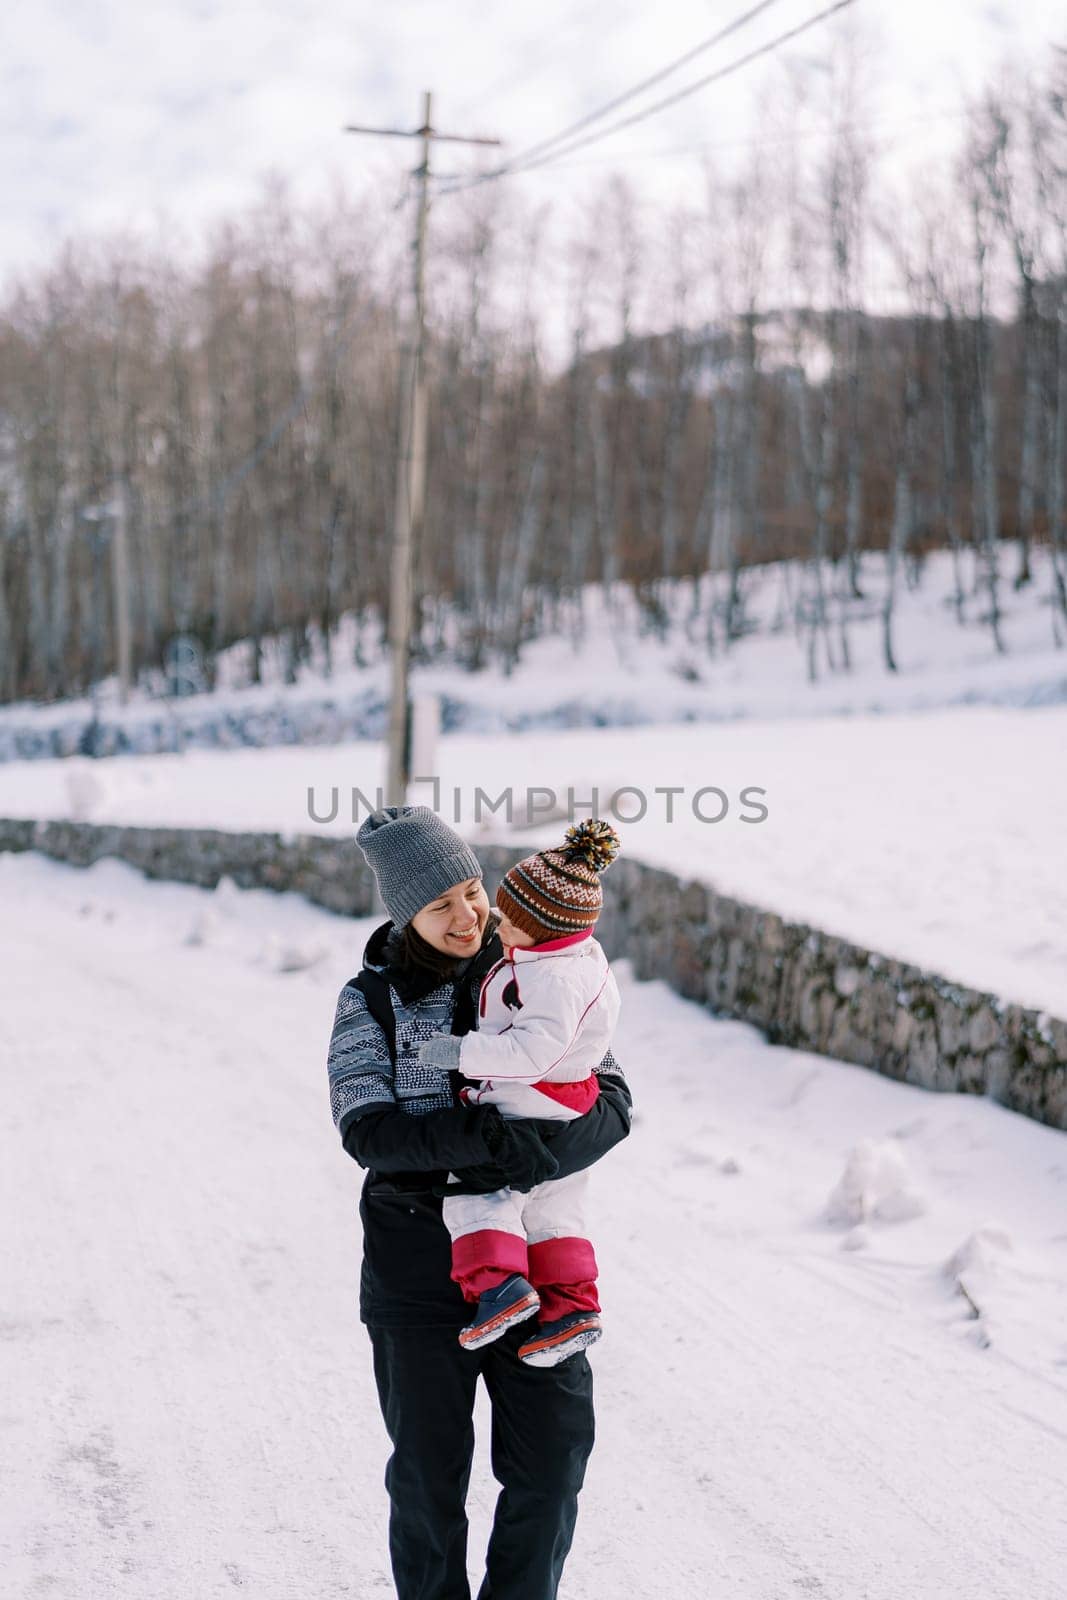 Smiling mother carries a small child on a snowy road. High quality photo